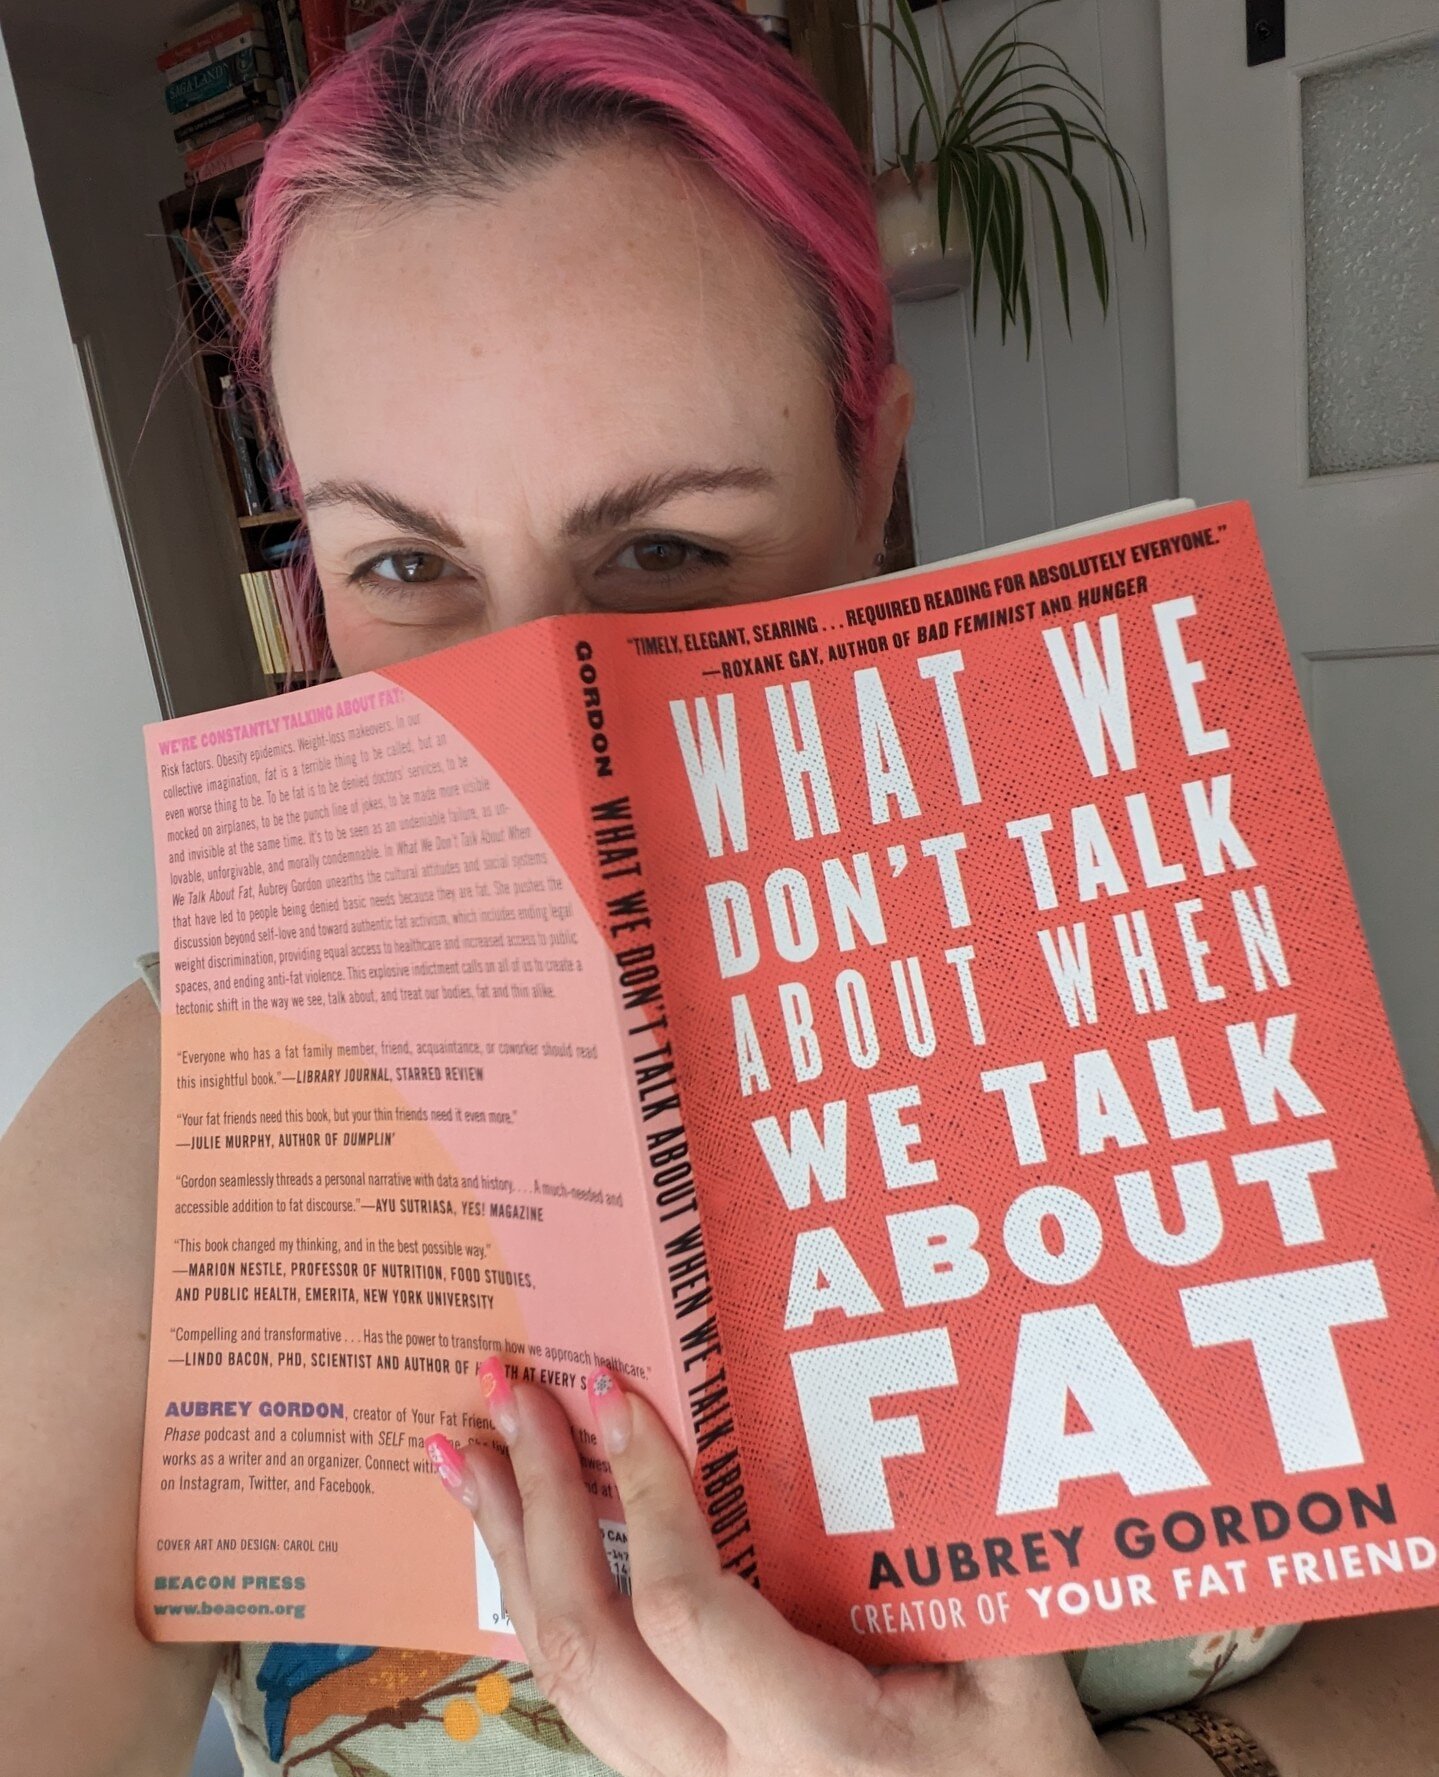 'What we don't talk about when we talk about fat' by Aubrey Gorden (@yrfatfriend) published by Beacon Press (@beaconpress)⁠
⁠
CW: discussion of body image both pos and neg/mention of WW and calorie counting/value judgement on food etc⁠
⁠
This book ha